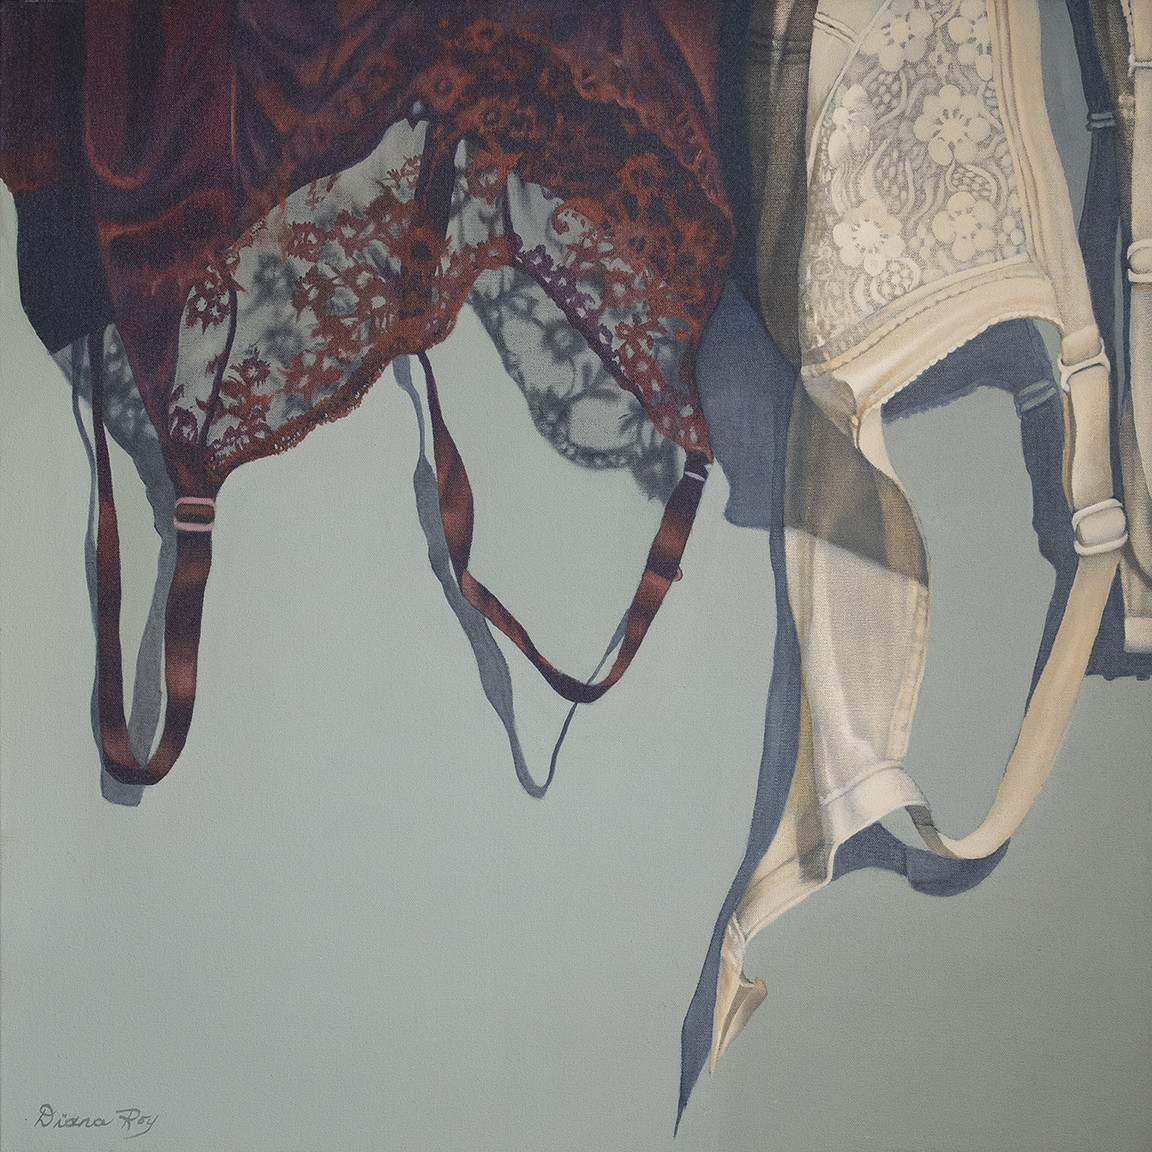 "Unmentionables" by Diana Roy 1940-2019 